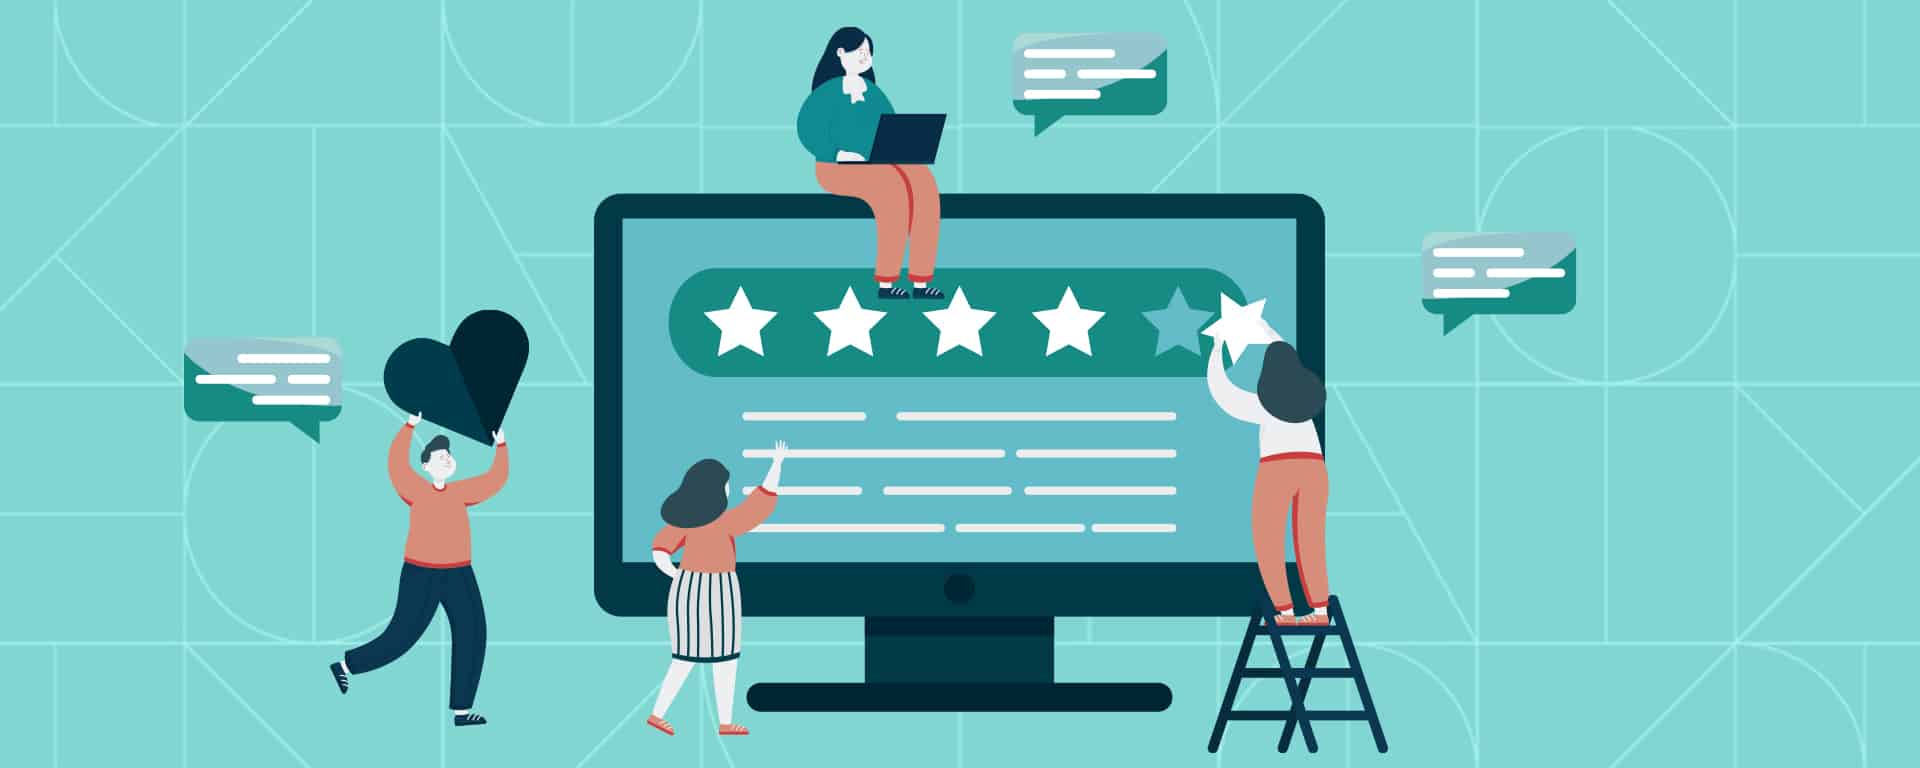 Digital Art of people in front of a computer creating an online review to represent why online reviews are important for your business